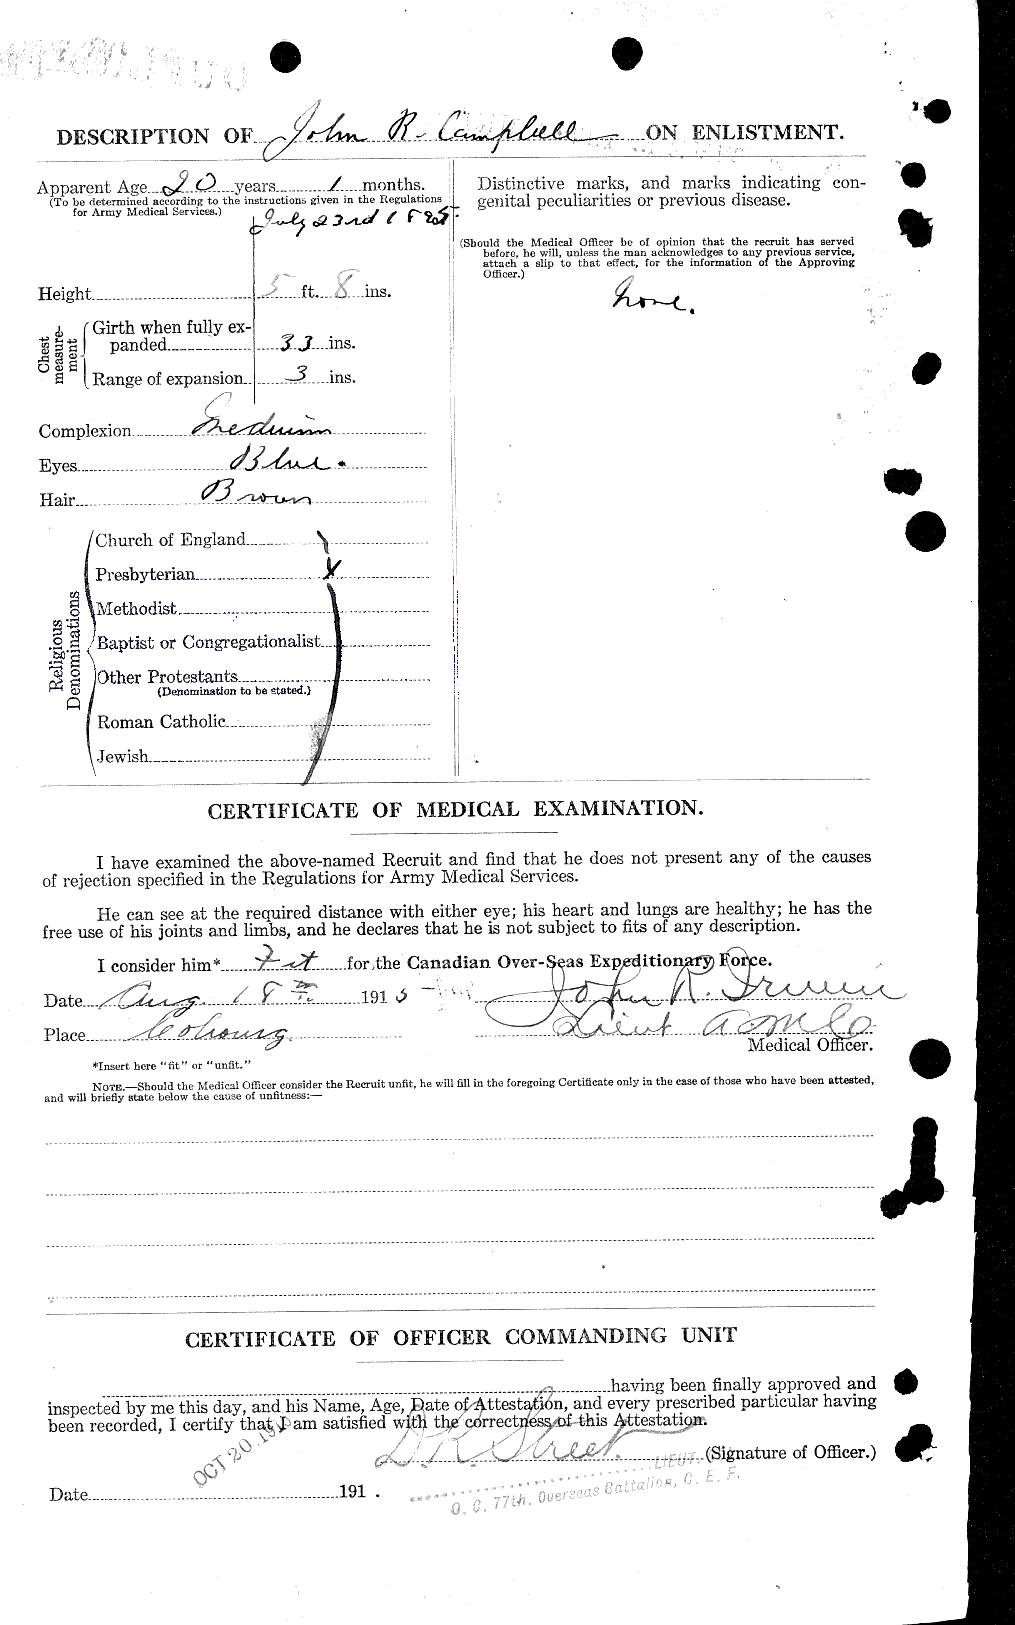 Personnel Records of the First World War - CEF 003785b